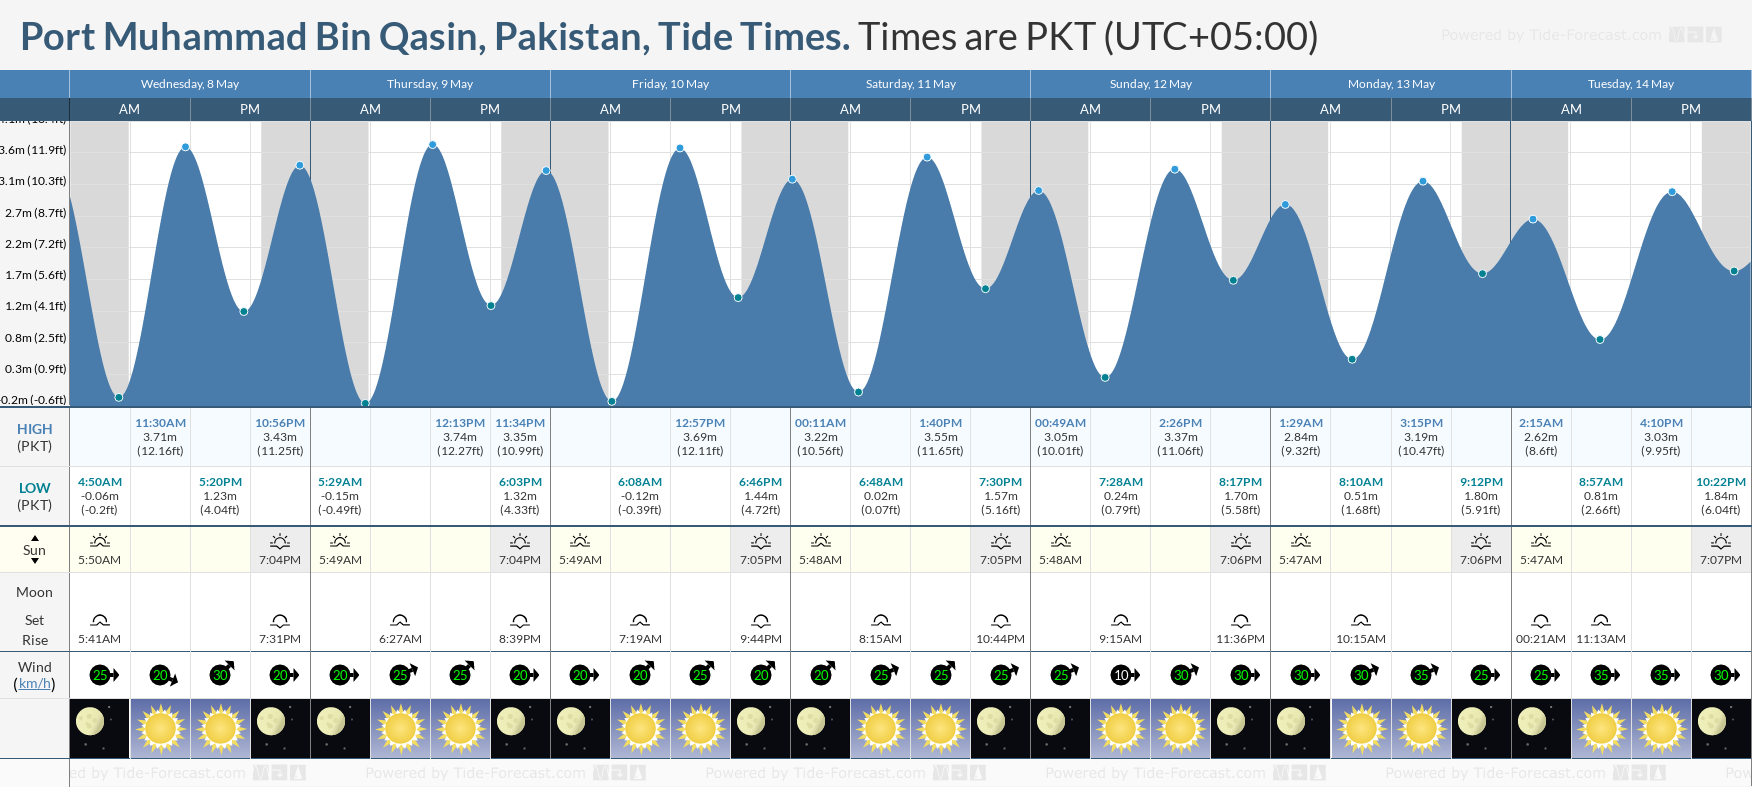 Port Muhammad Bin Qasin, Pakistan Tide Chart including high and low tide tide times for the next 7 days